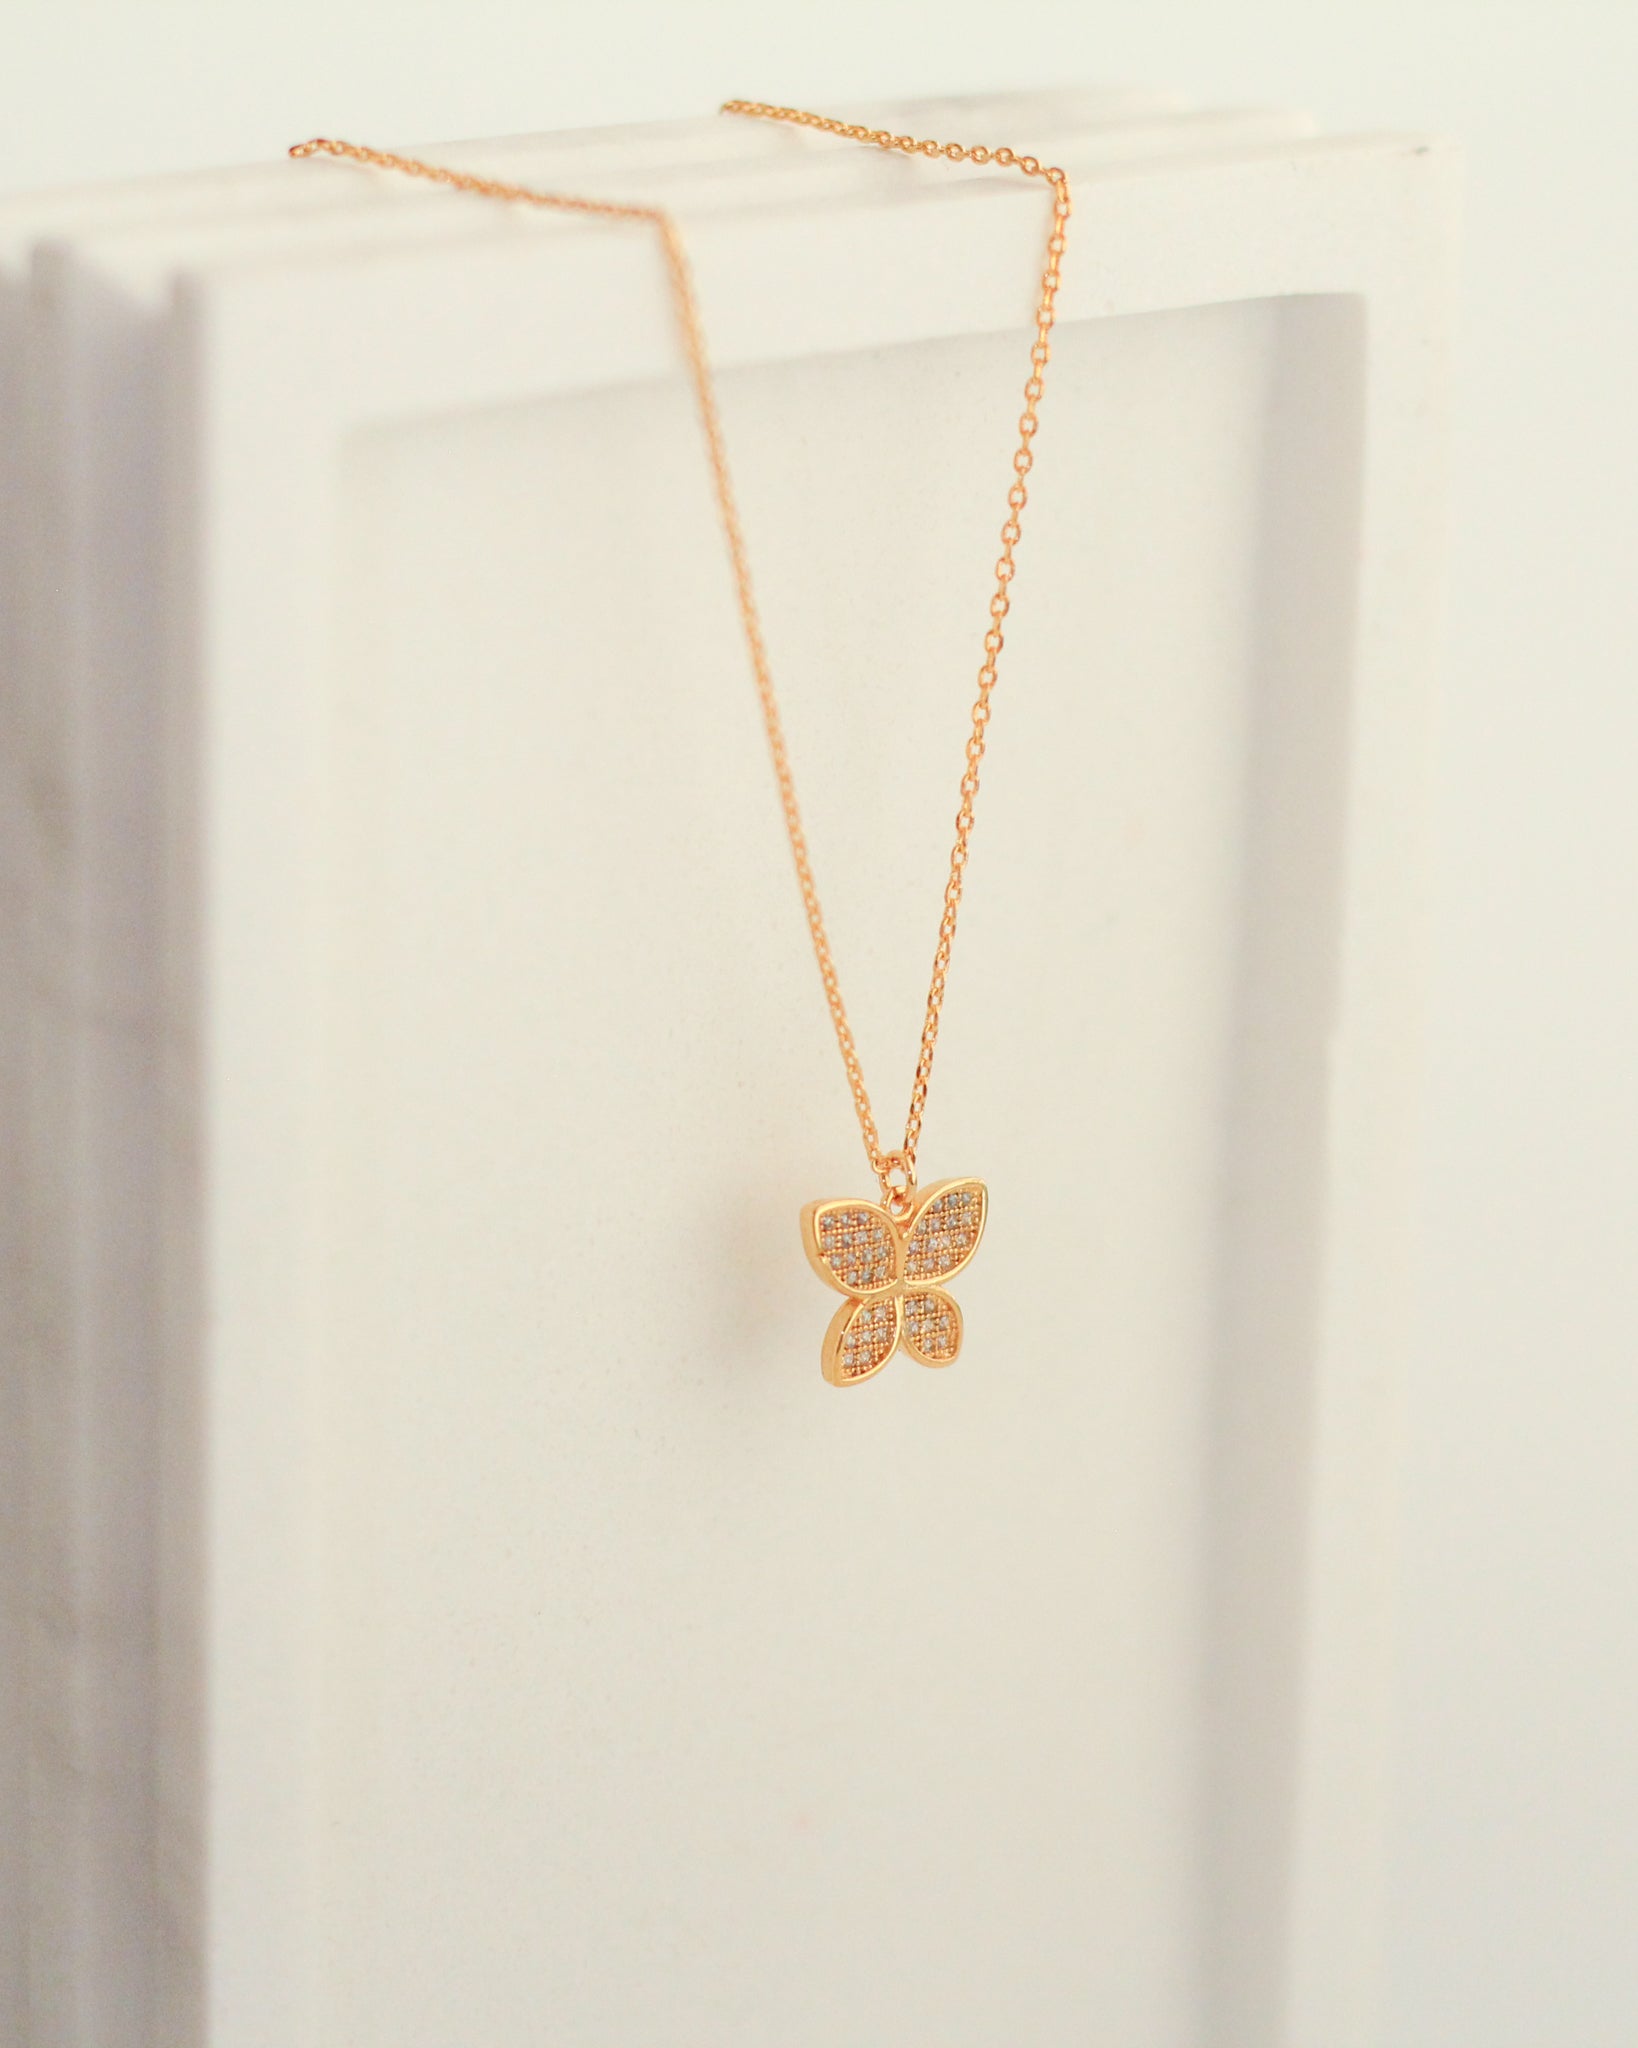 Rounded Wing Pave Butterfly Necklace hanging.